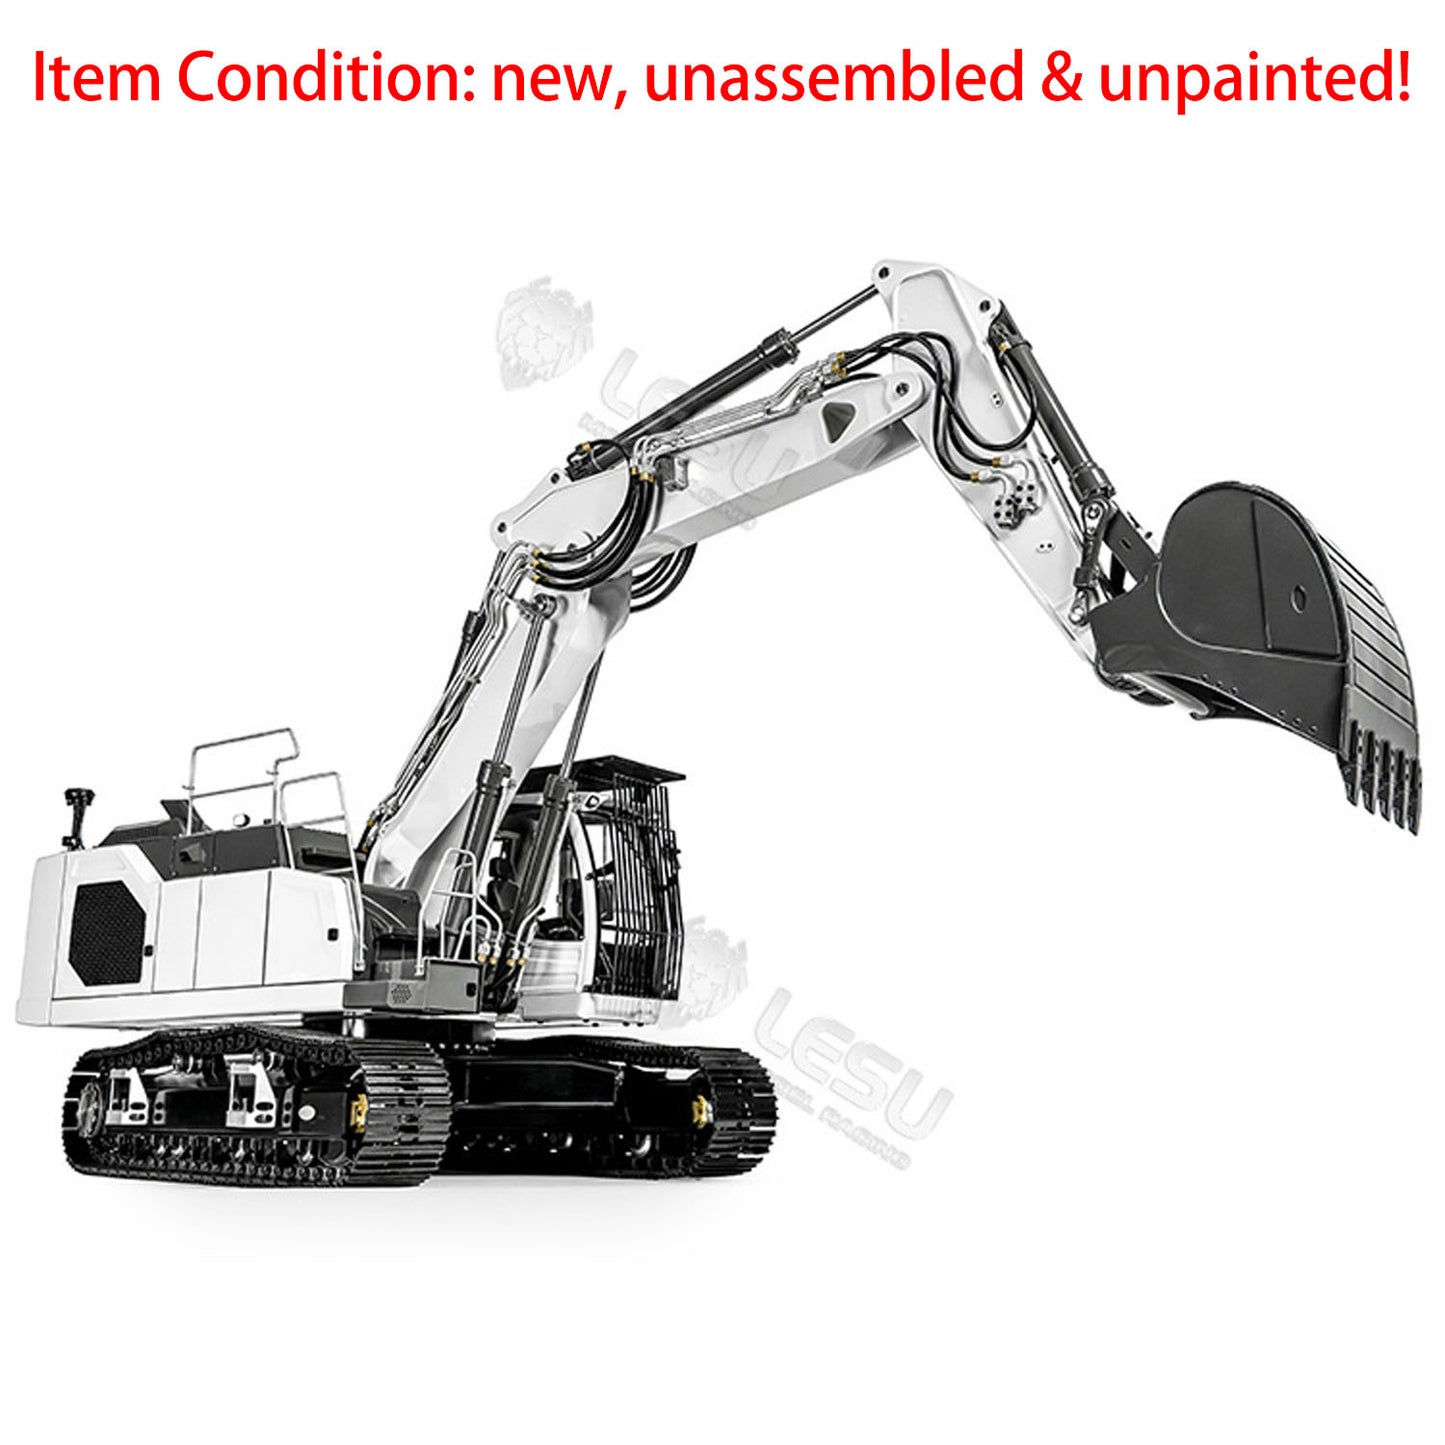 LESU 1/14 3-arm LR945 RC Hydraulic Excavator Remote Control Digger Heavy-duty Electric Hobby Model Kits Unpainted and Unassembled